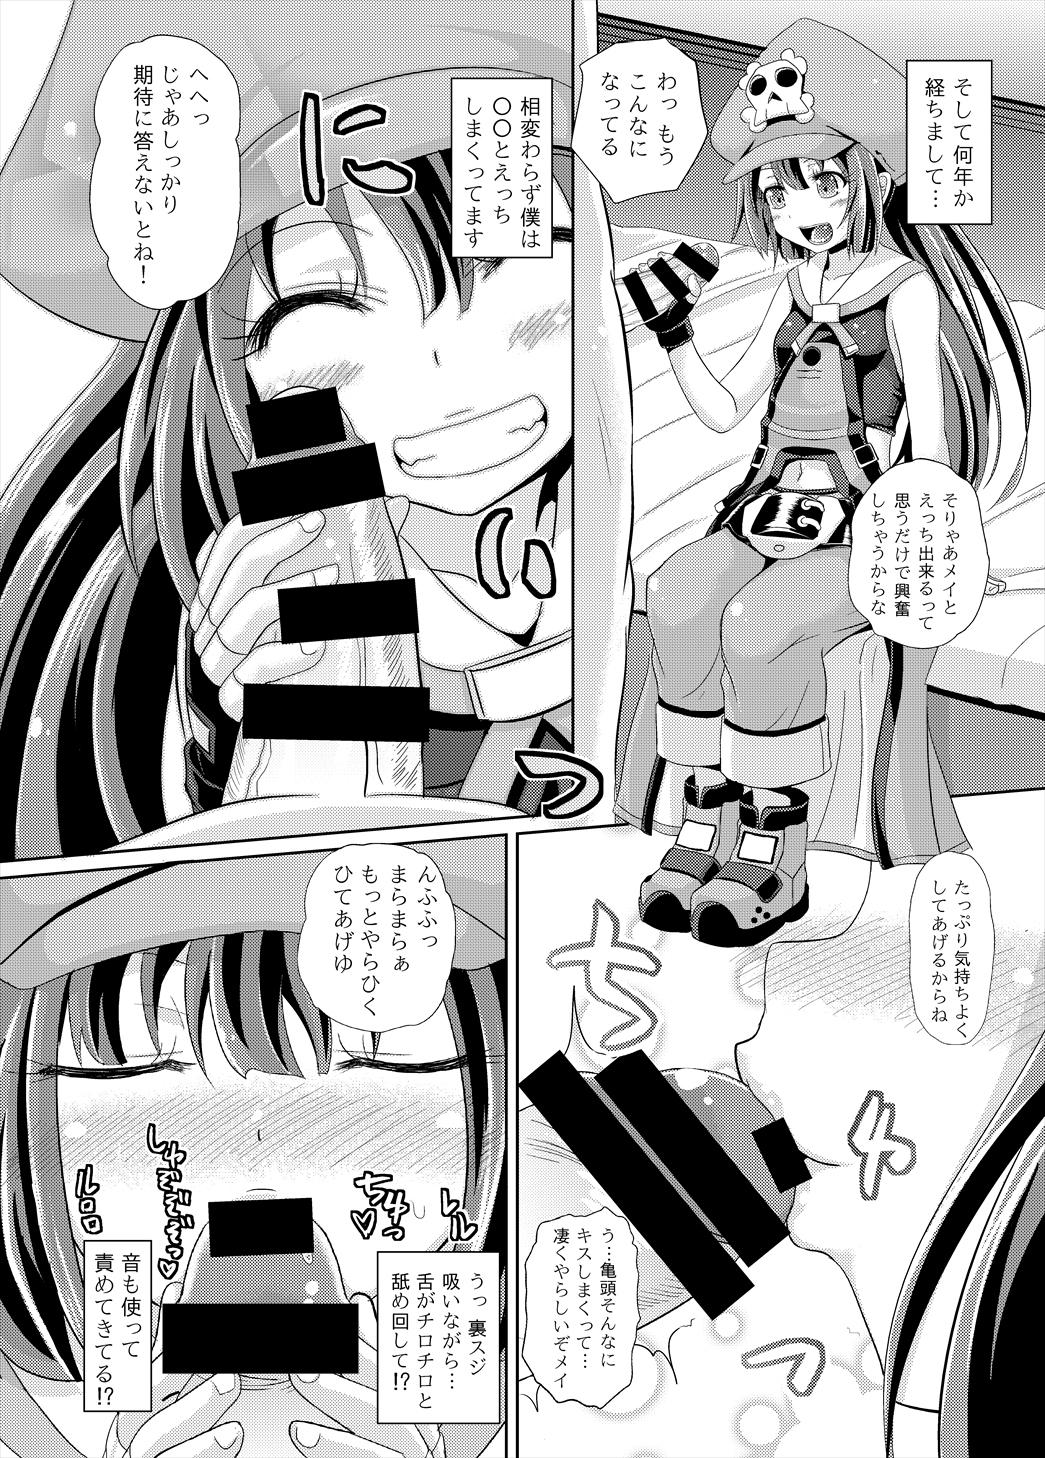 Teasing May Zanmai - Guilty gear Missionary Porn - Page 9